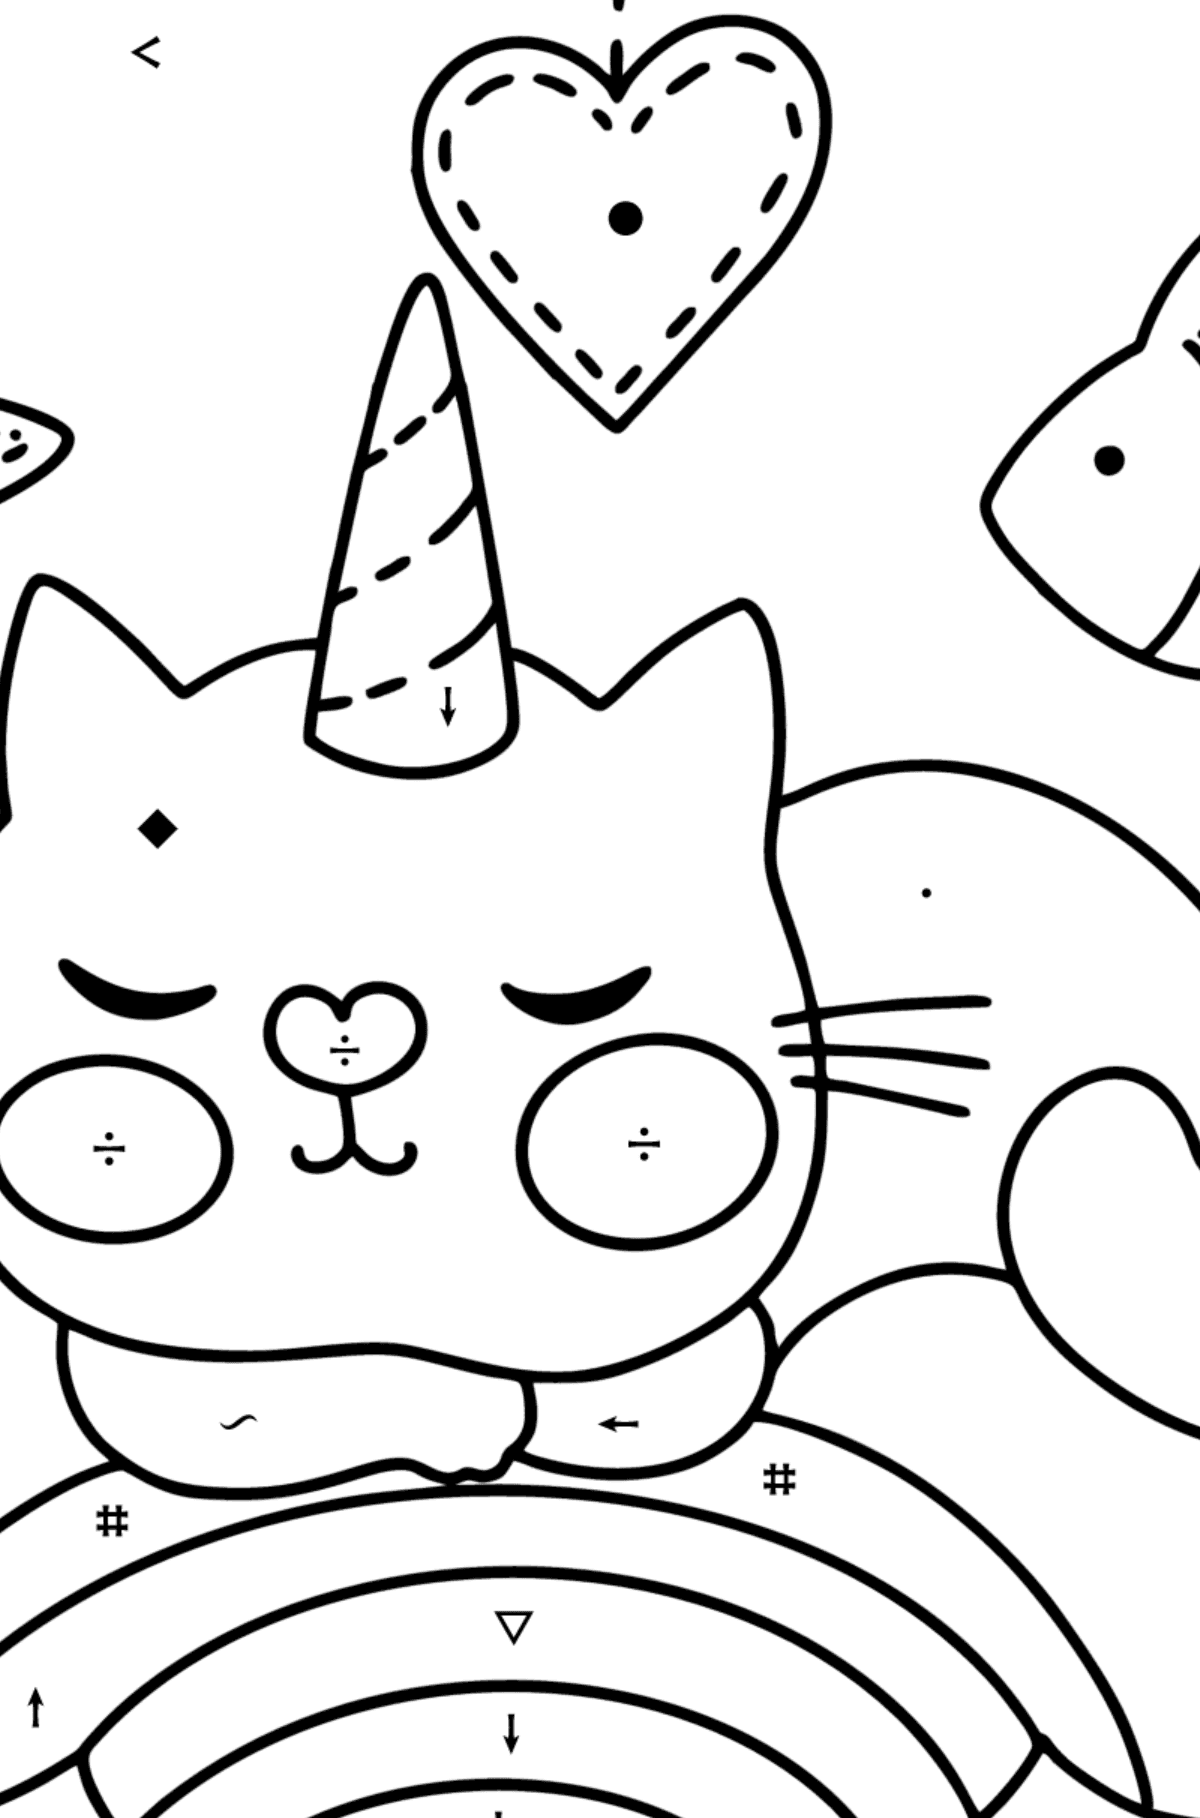 Cute cat unicorn coloring page - Coloring by Symbols for Kids